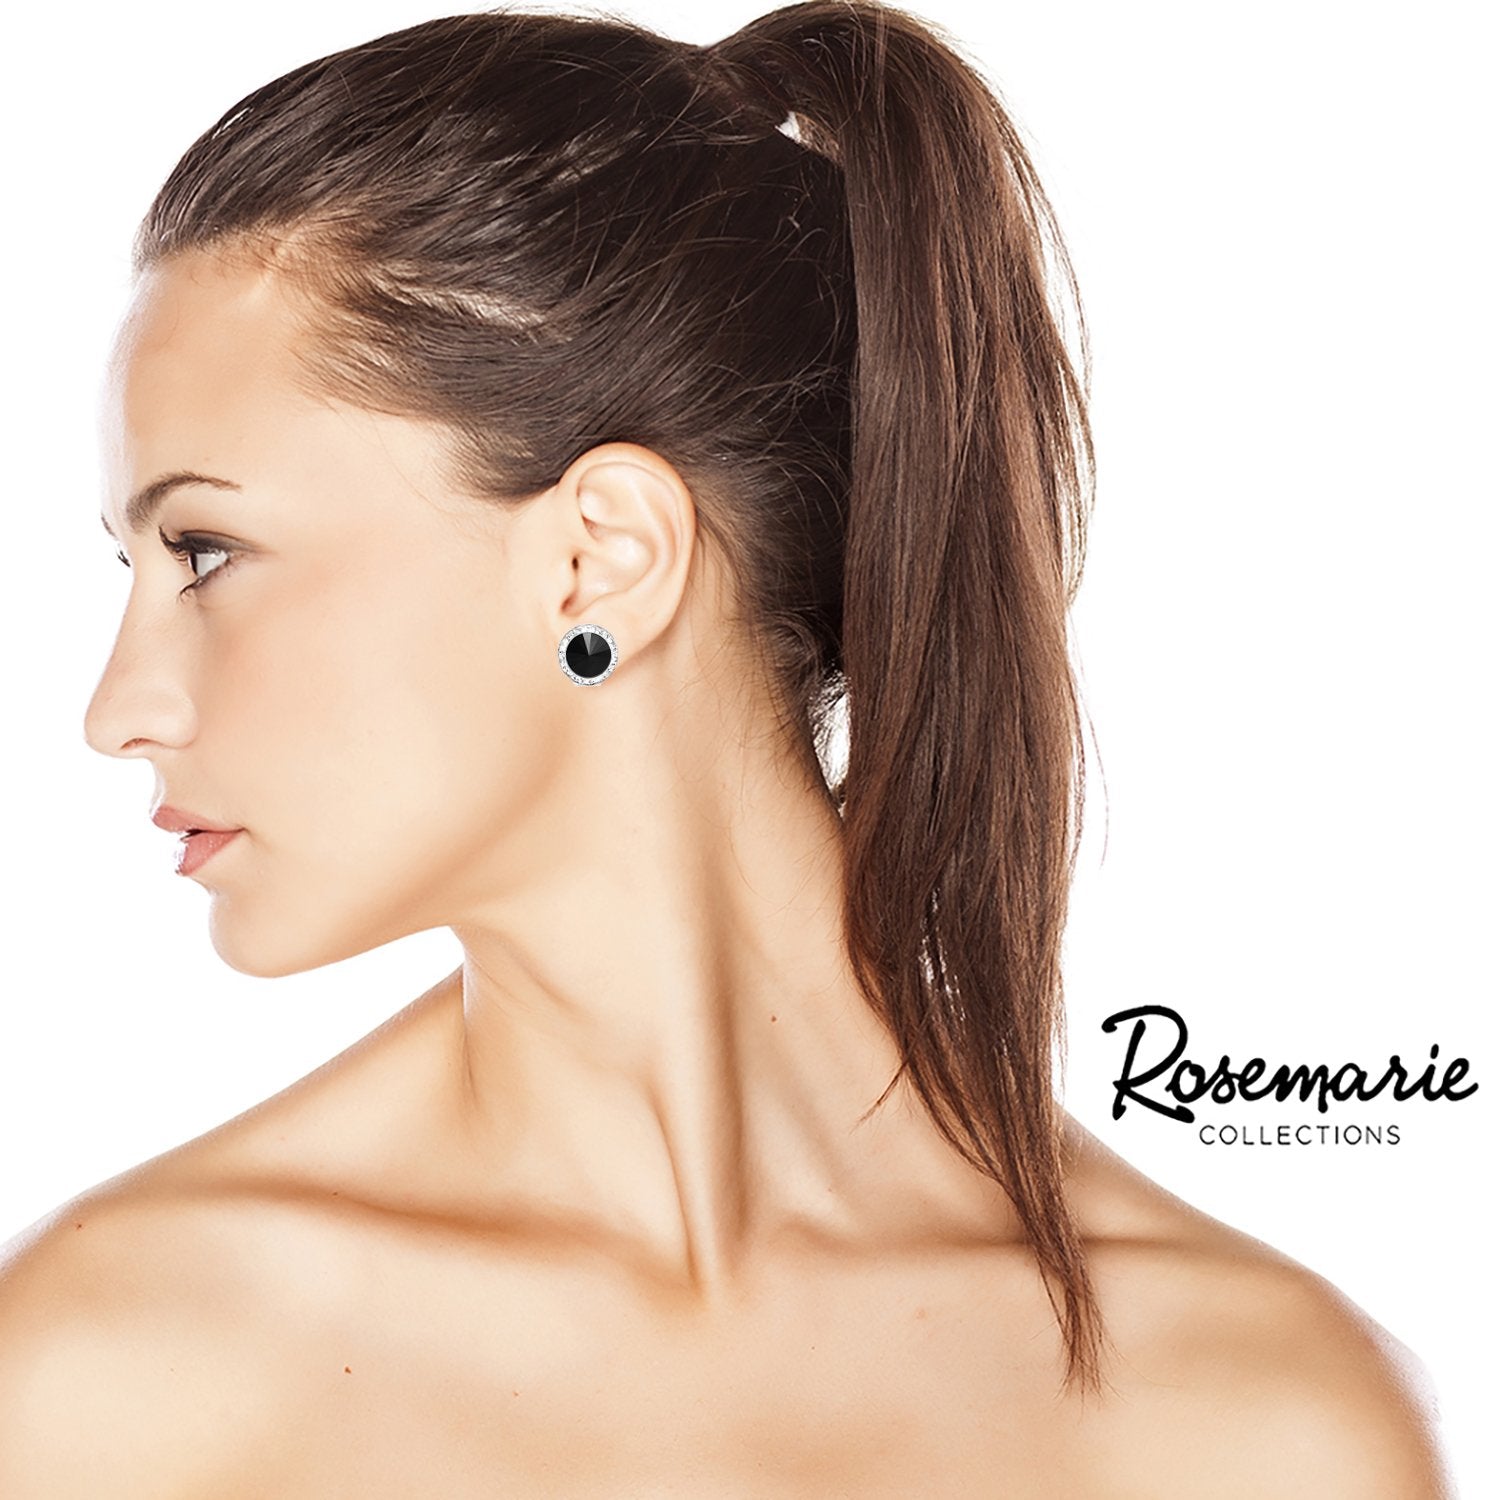 Timeless Classic Statement Clip On Earrings Made with Swarovski Crystals, 15mm-20mm (15mm, Jet Black Silver Tone)